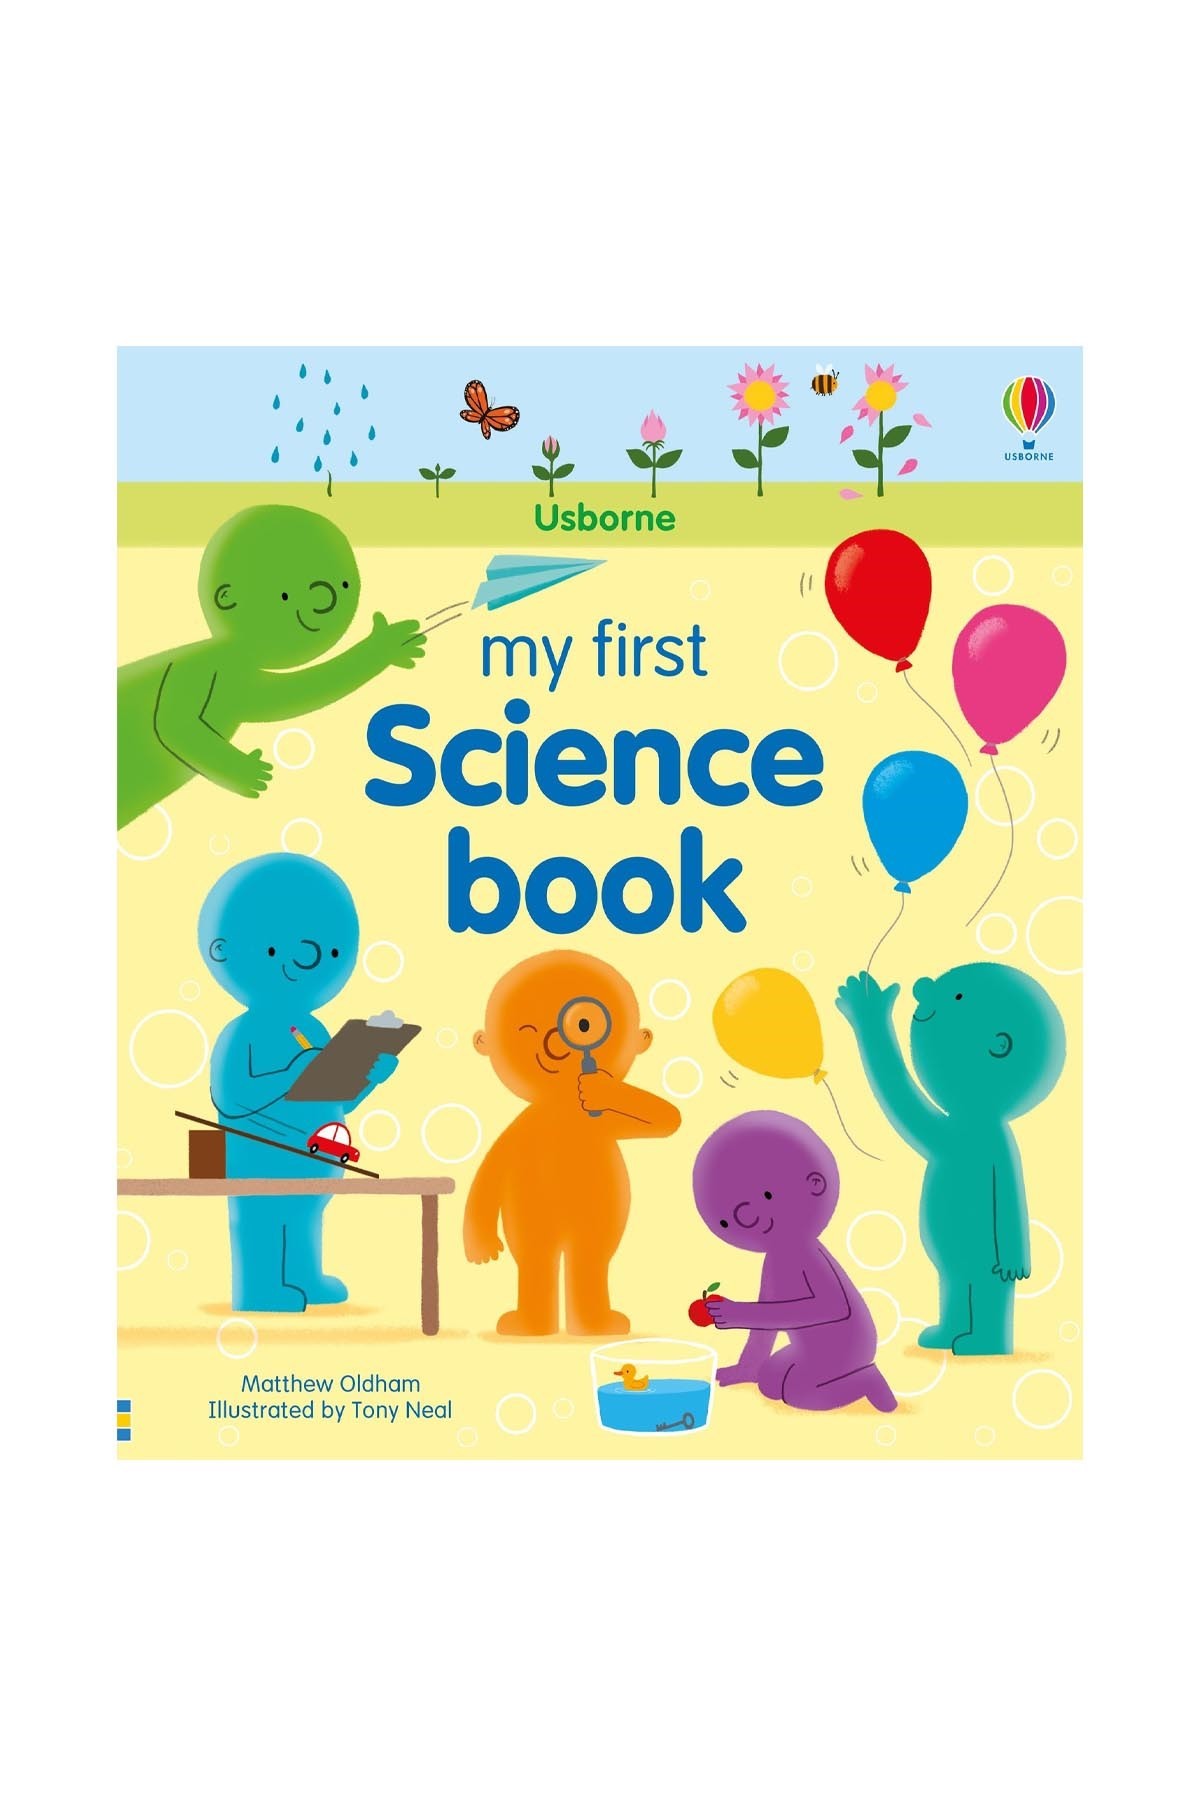 The Usborne My First Science Book